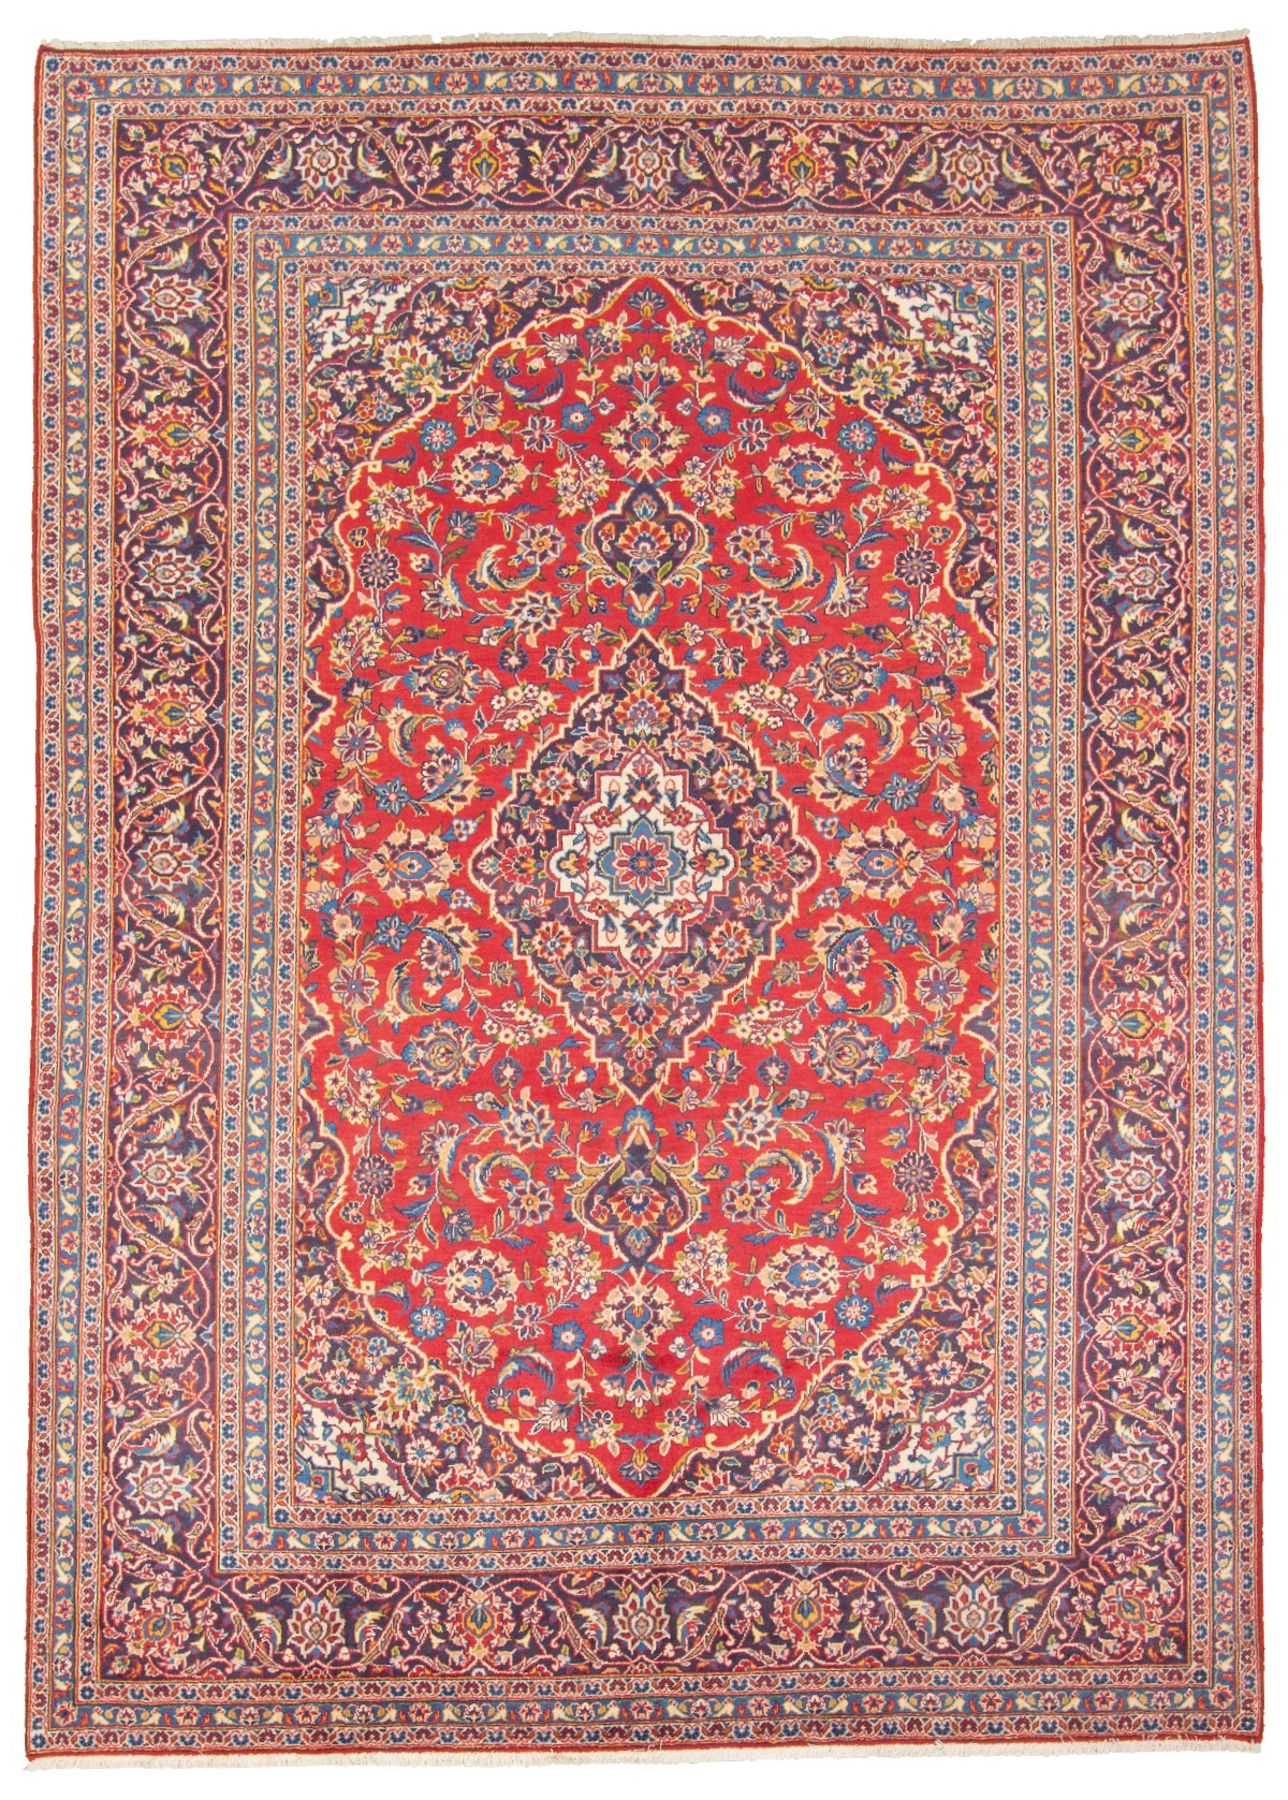 Hand-knotted Kashan  Wool Rug 8'2" x 11'8"  Size: 8'2" x 11'8"  